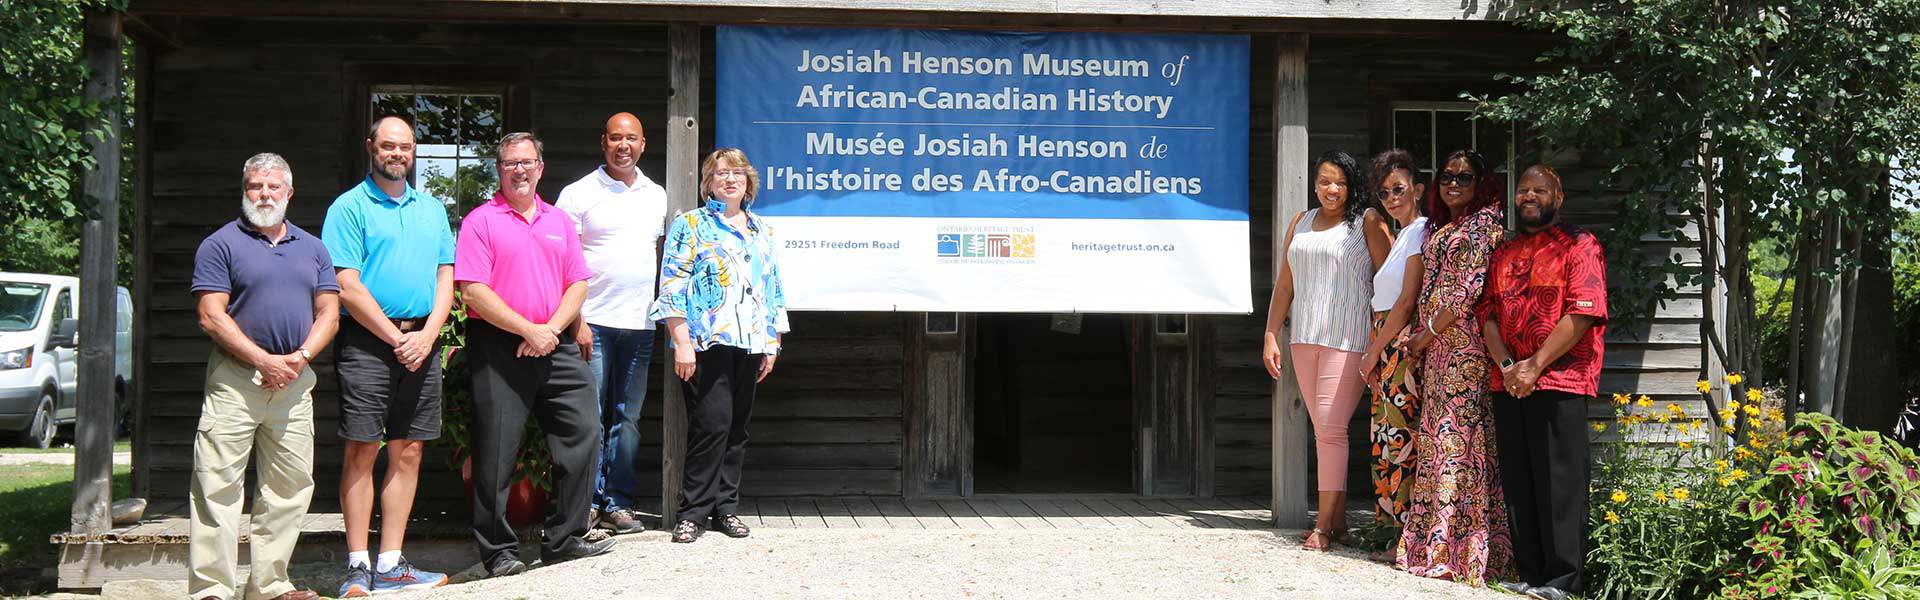 Unveiling of the new name for the Josiah Henson Museum of African-Canadian History on July 30, 2022